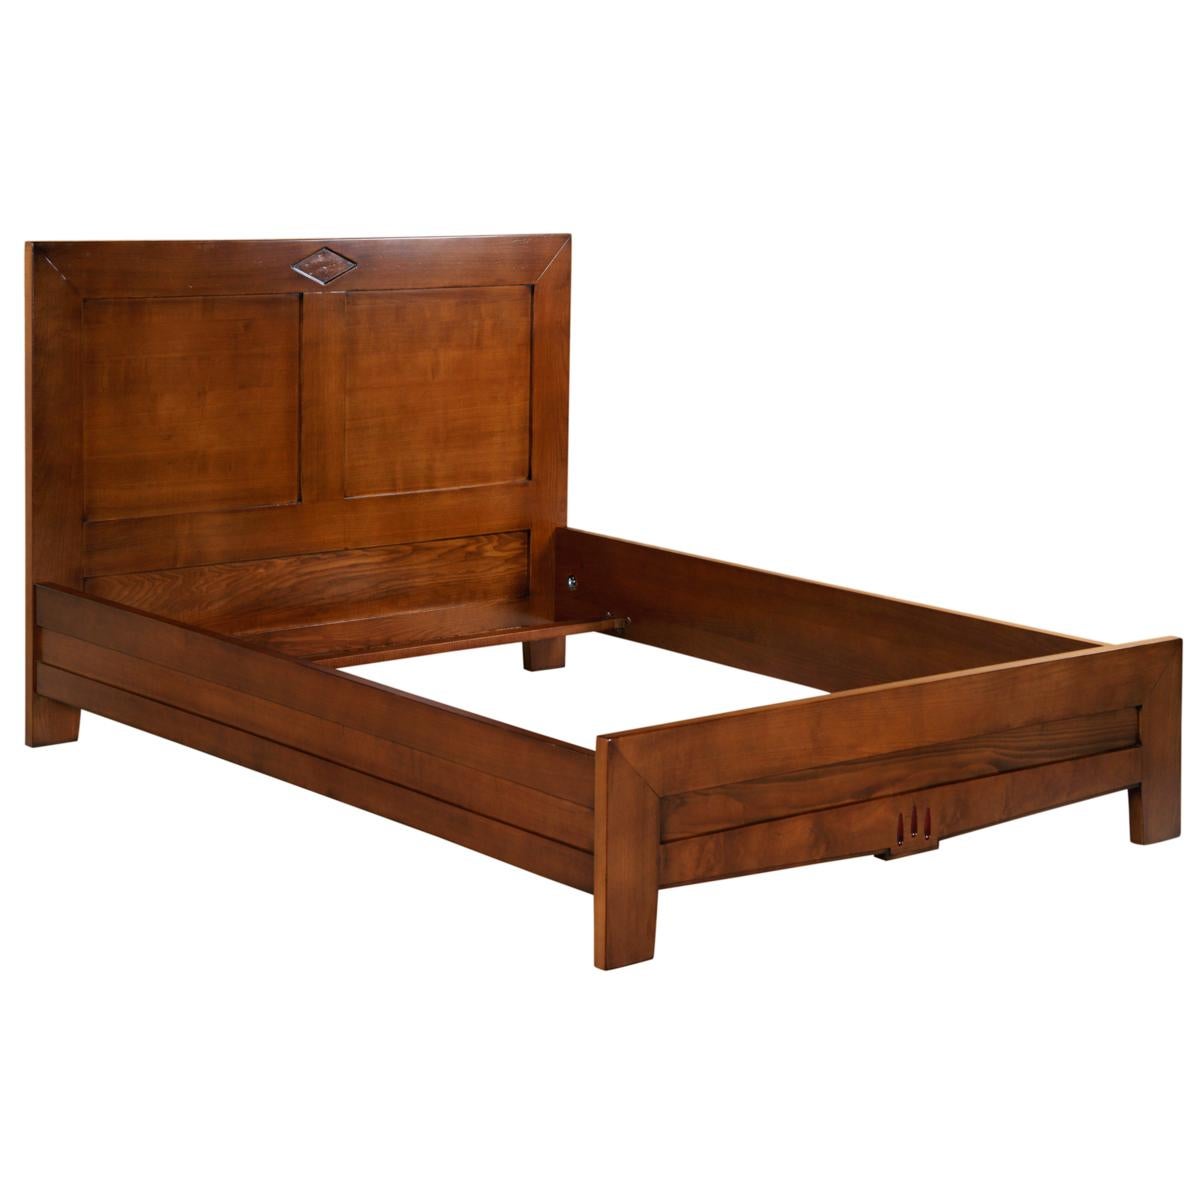 Neoclassical French Directoire Style Bed Frame in Stained Solid Cherry For Sale